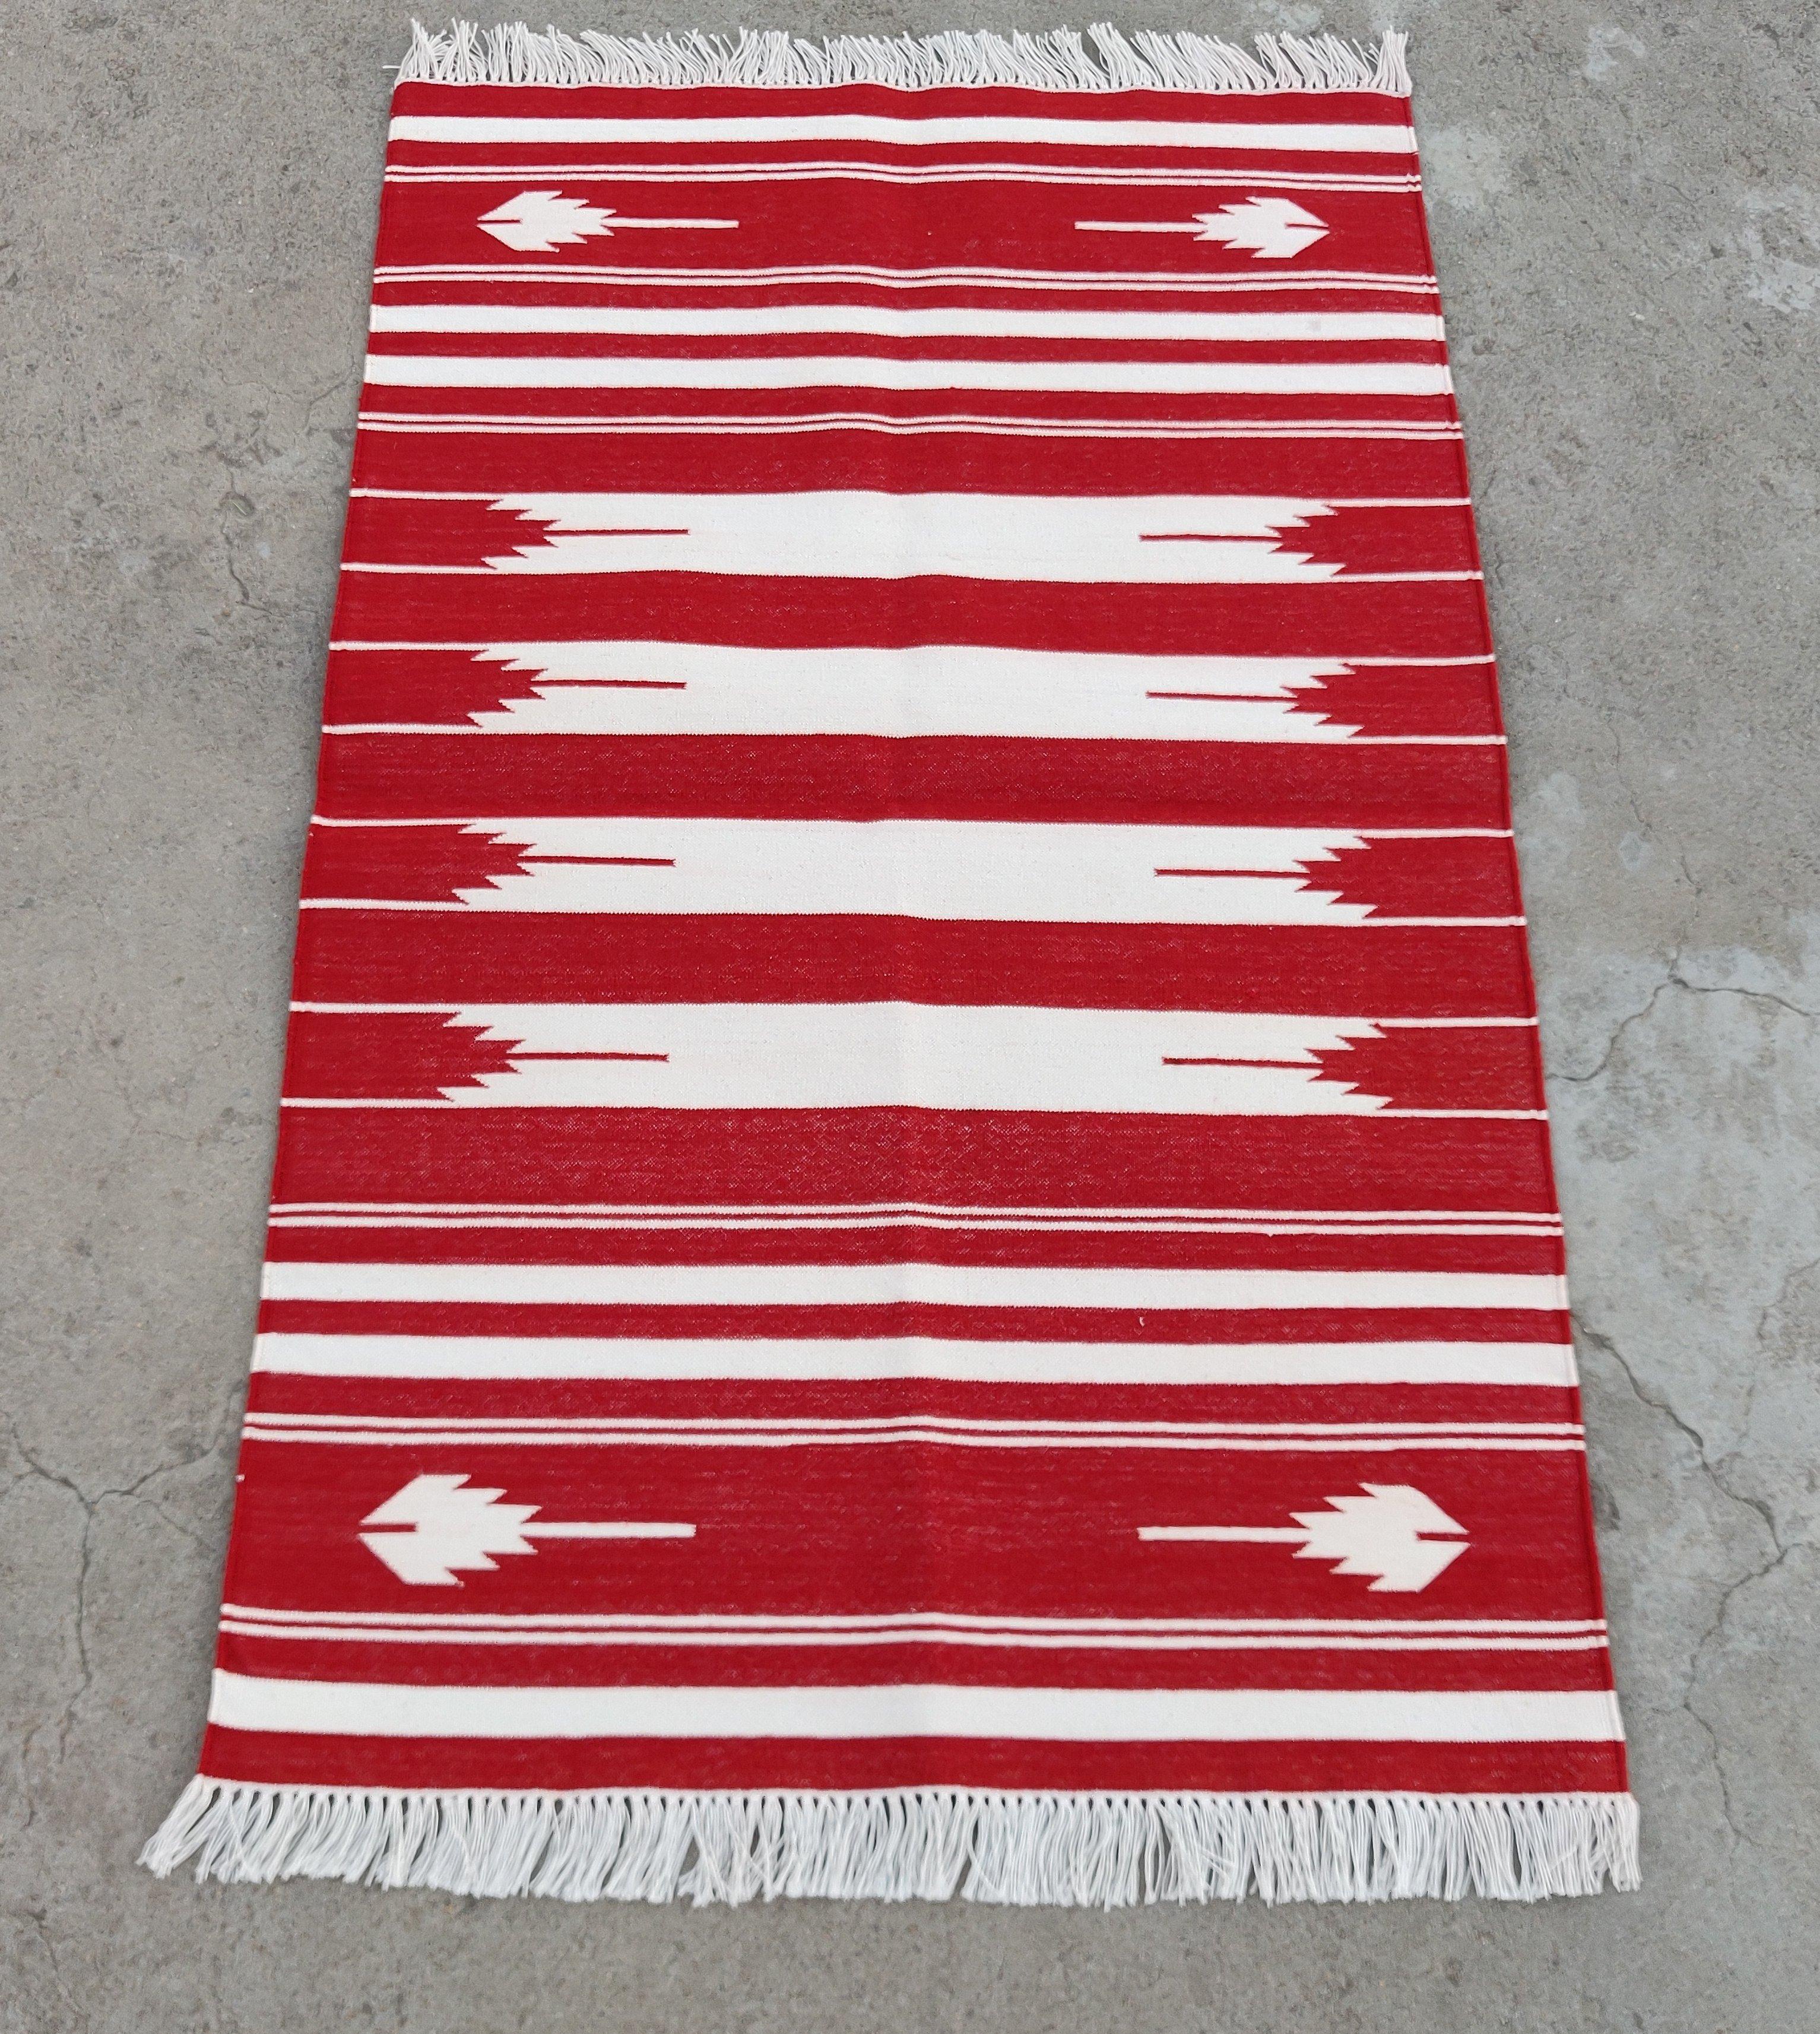 Handmade Cotton Area Flat Weave Rug, 2.5'x4' Red And White Striped Indian Rug In New Condition For Sale In Jaipur, IN